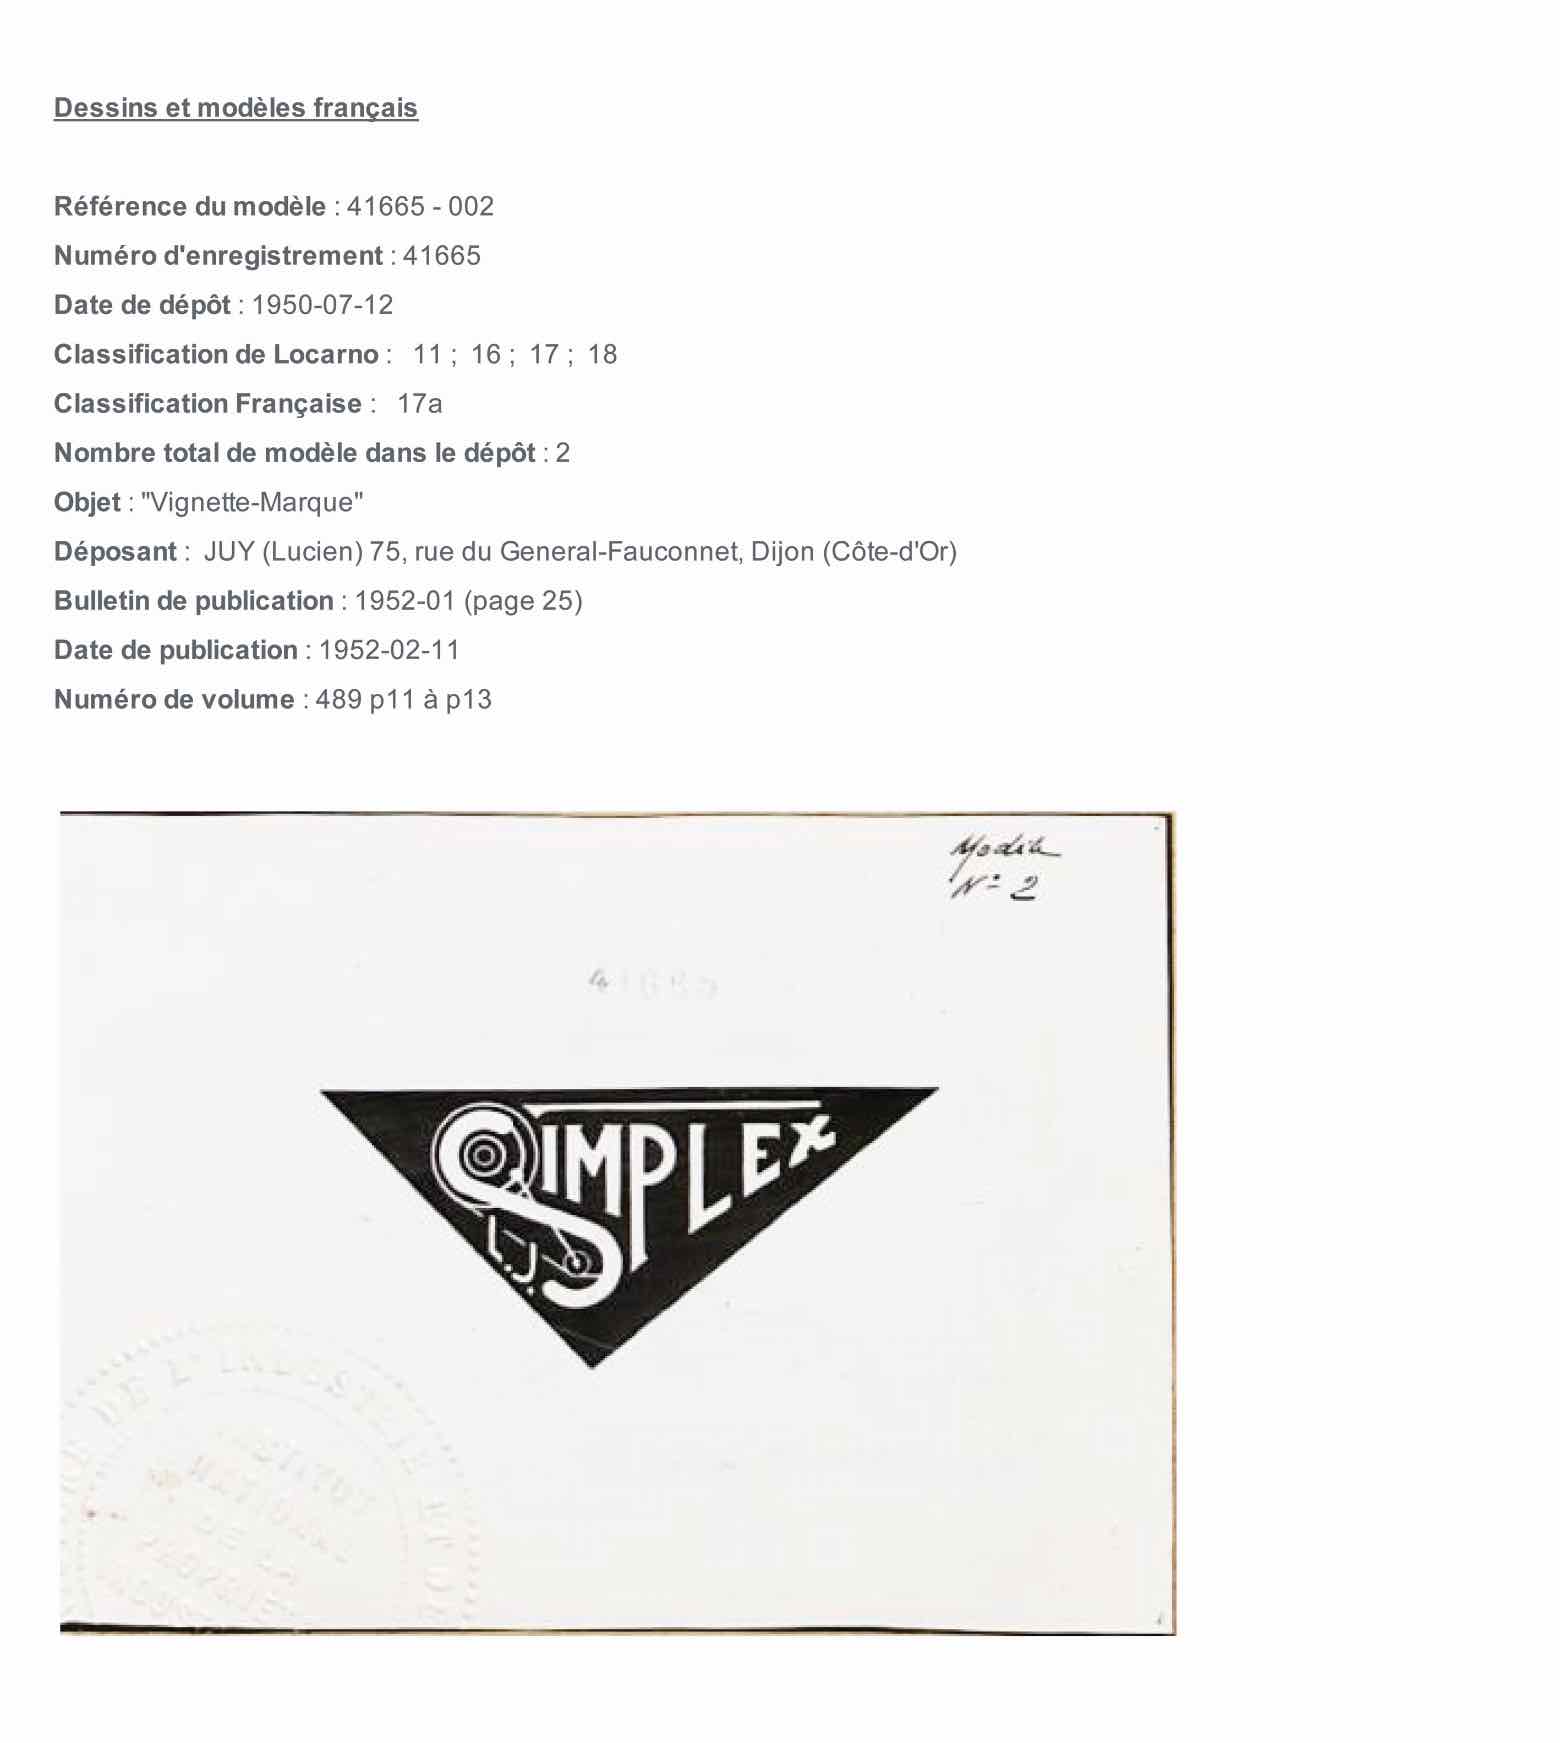 French Registered Design 41665-002 - Simplex main image